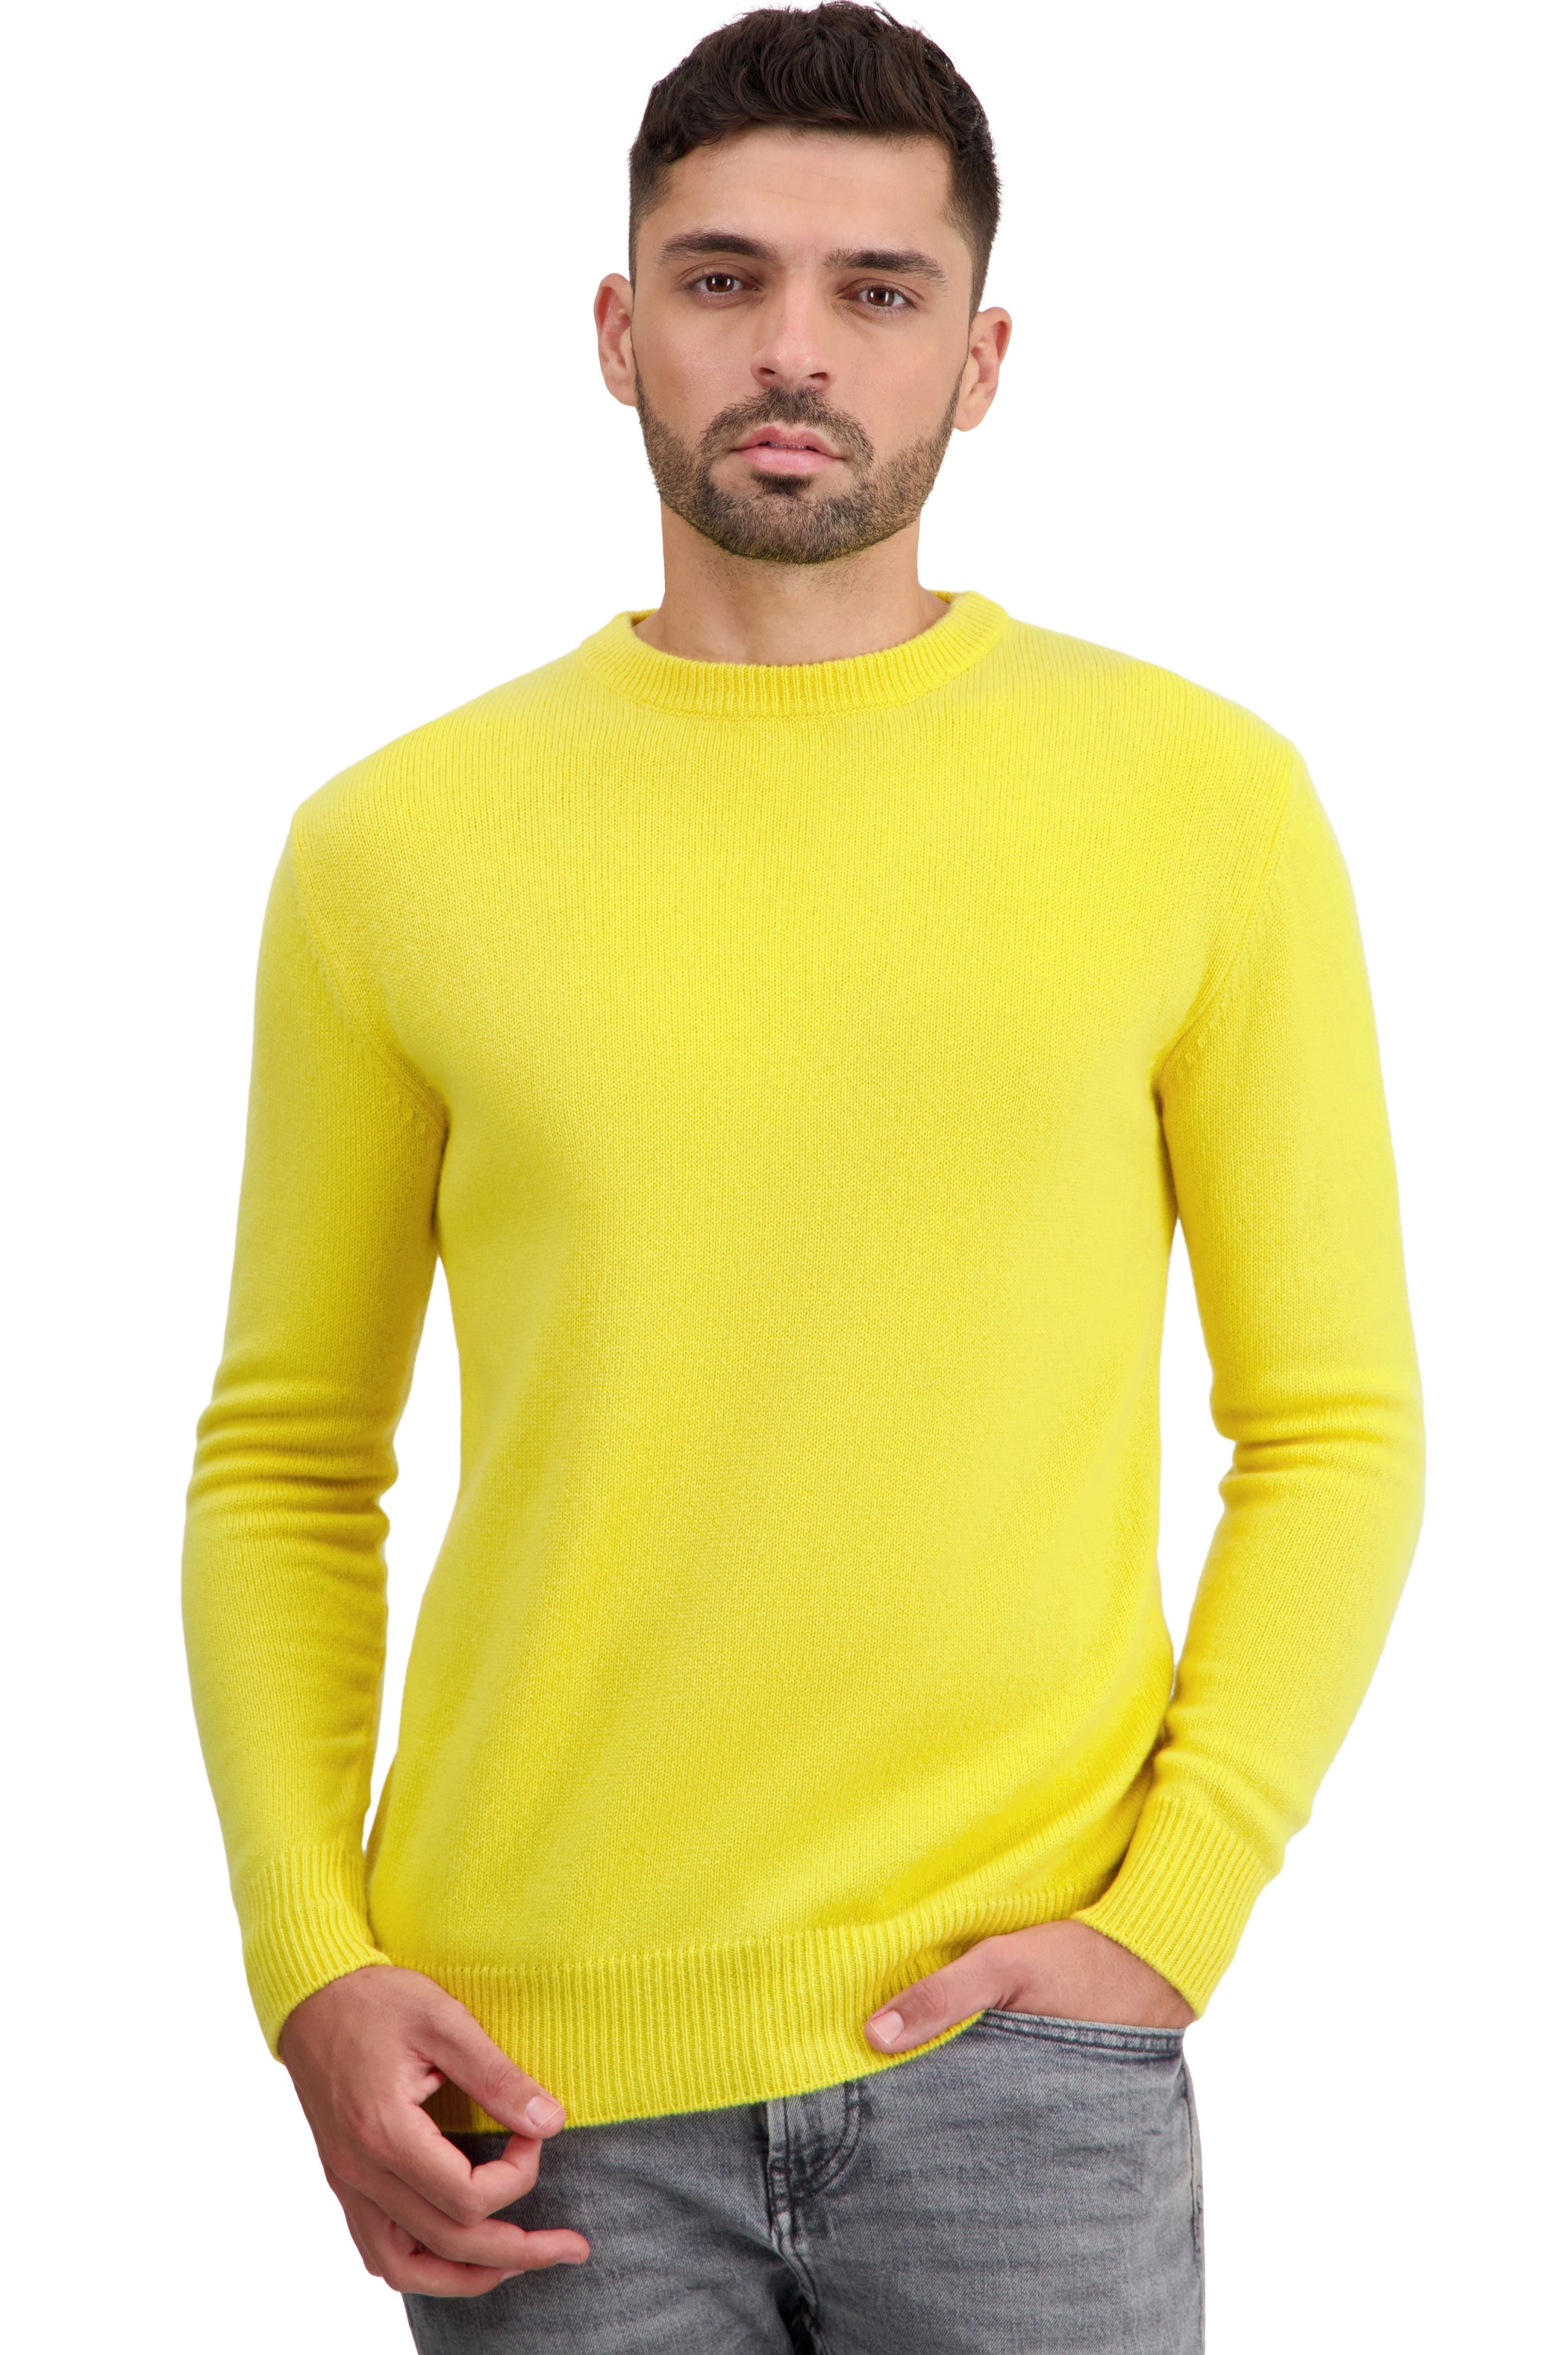 Cashmere men basic sweaters at low prices touraine first daffodil s